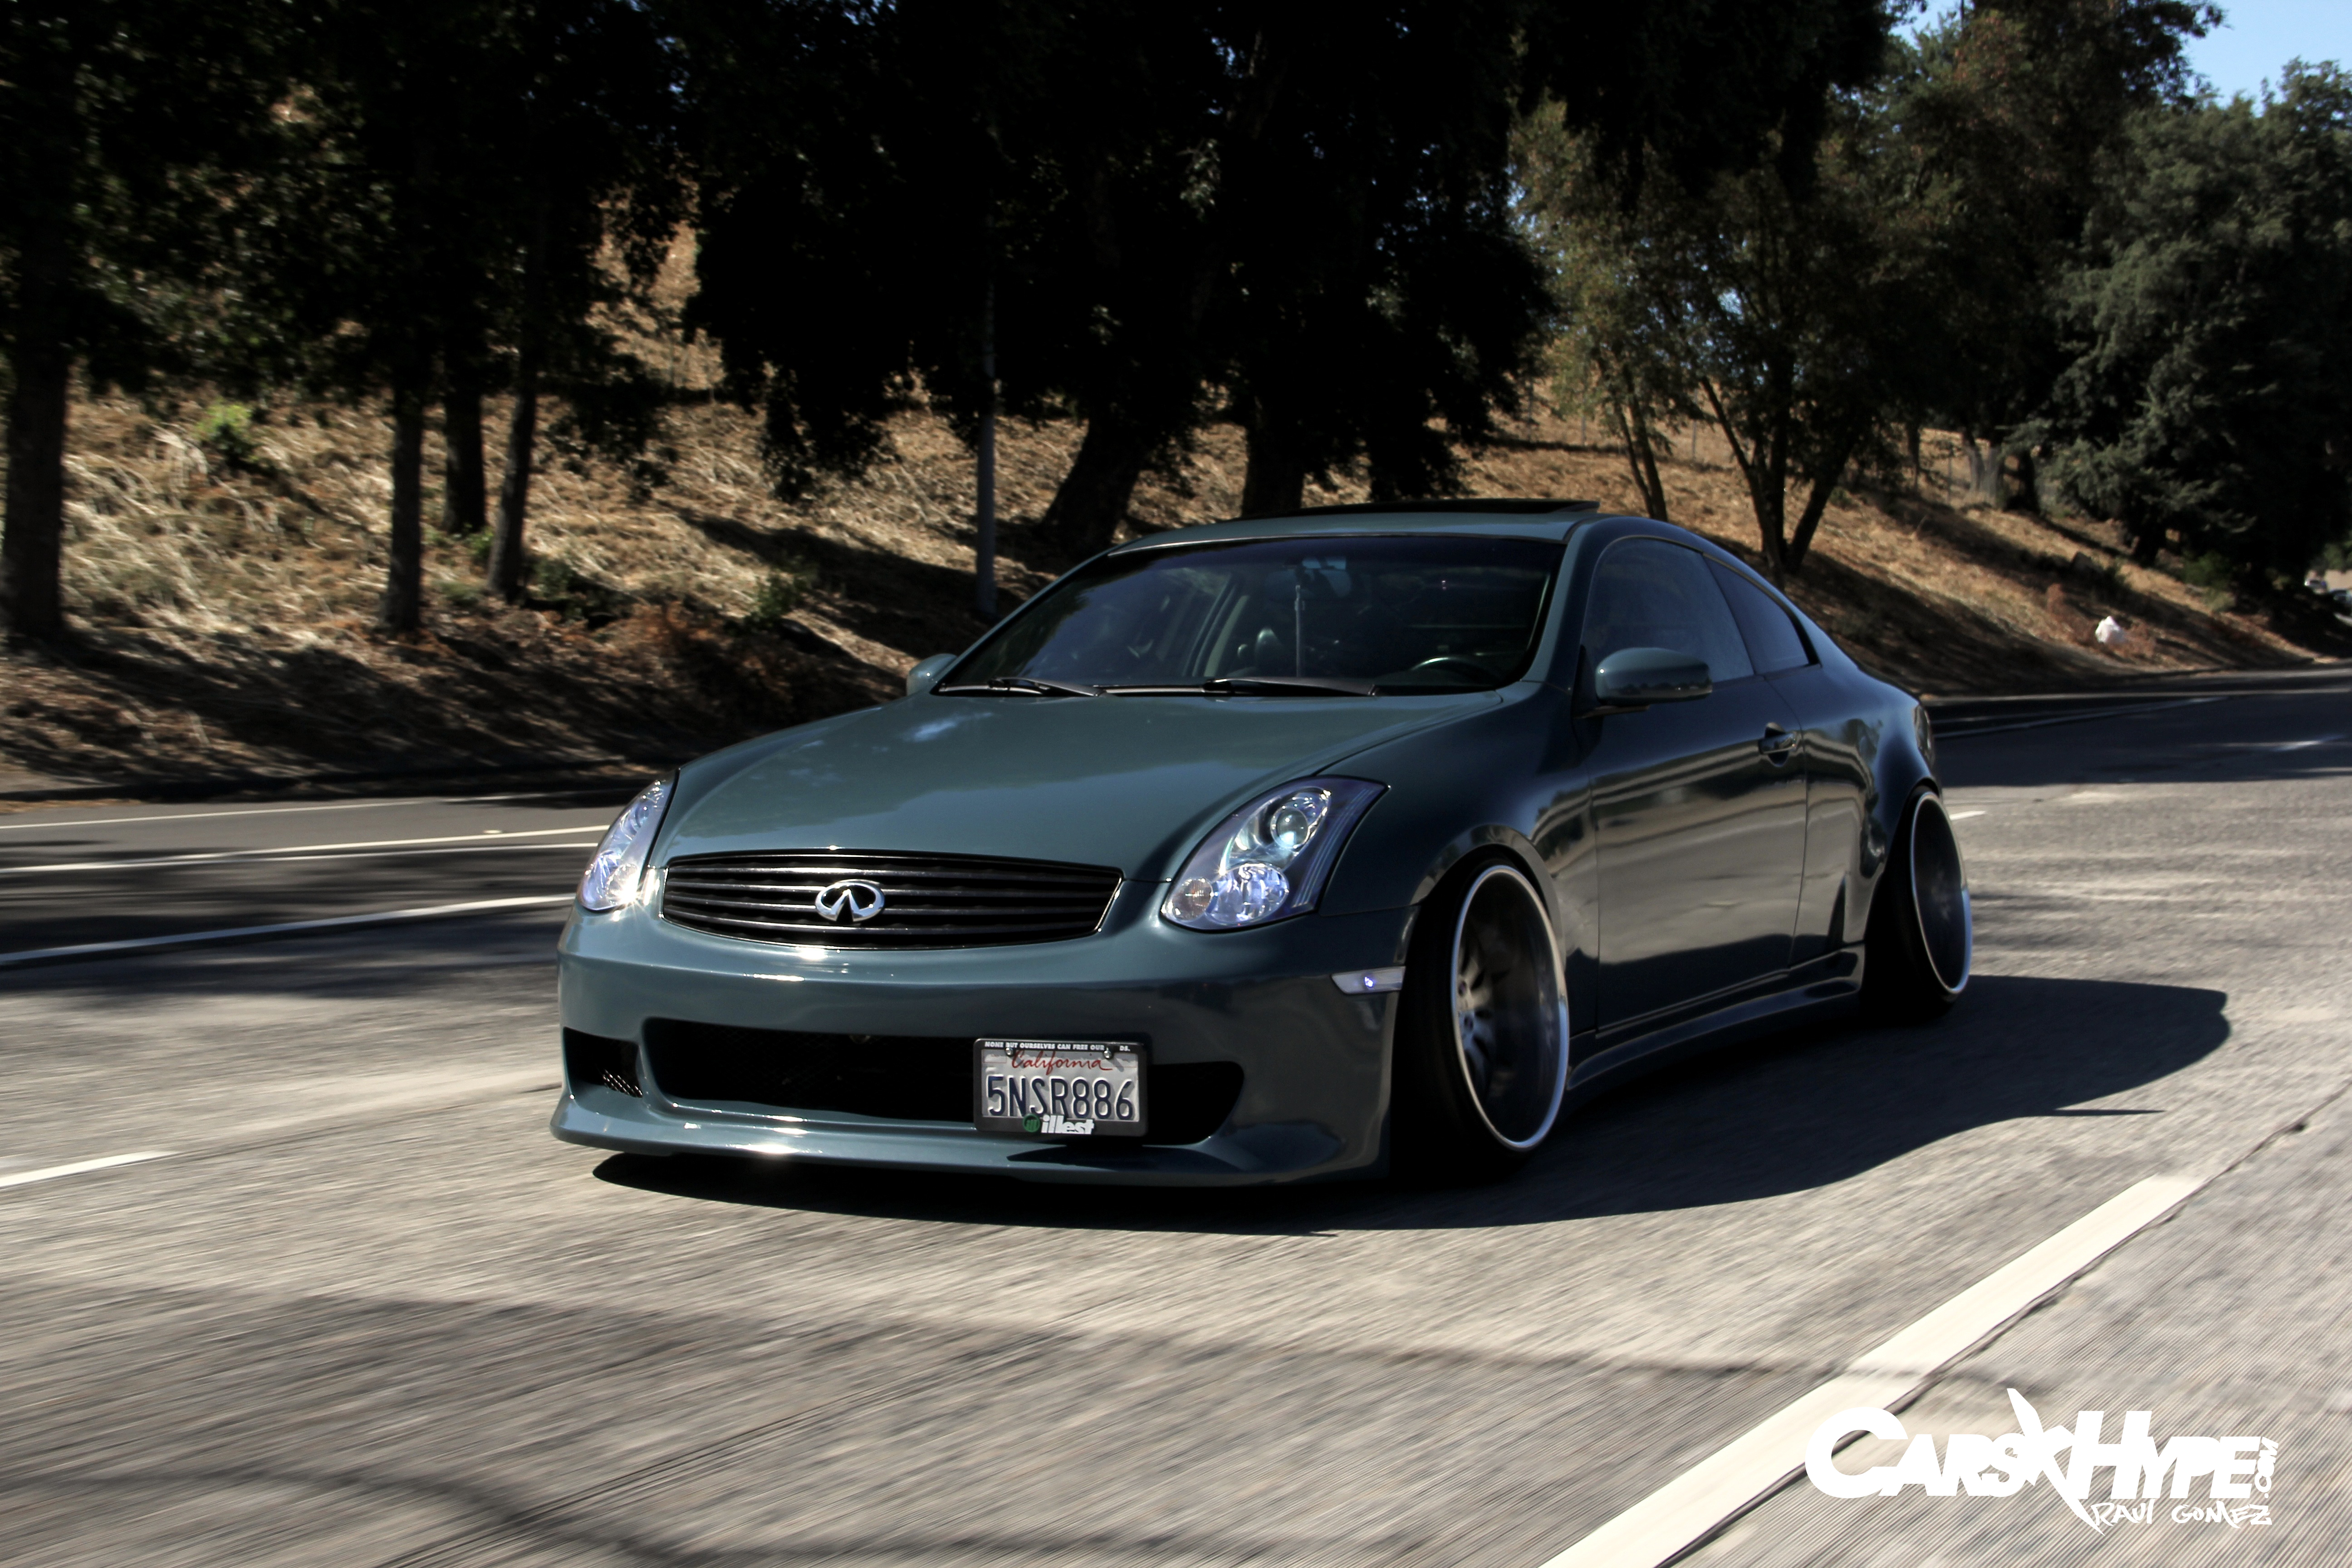 Matthew’s Stanced Out G35.